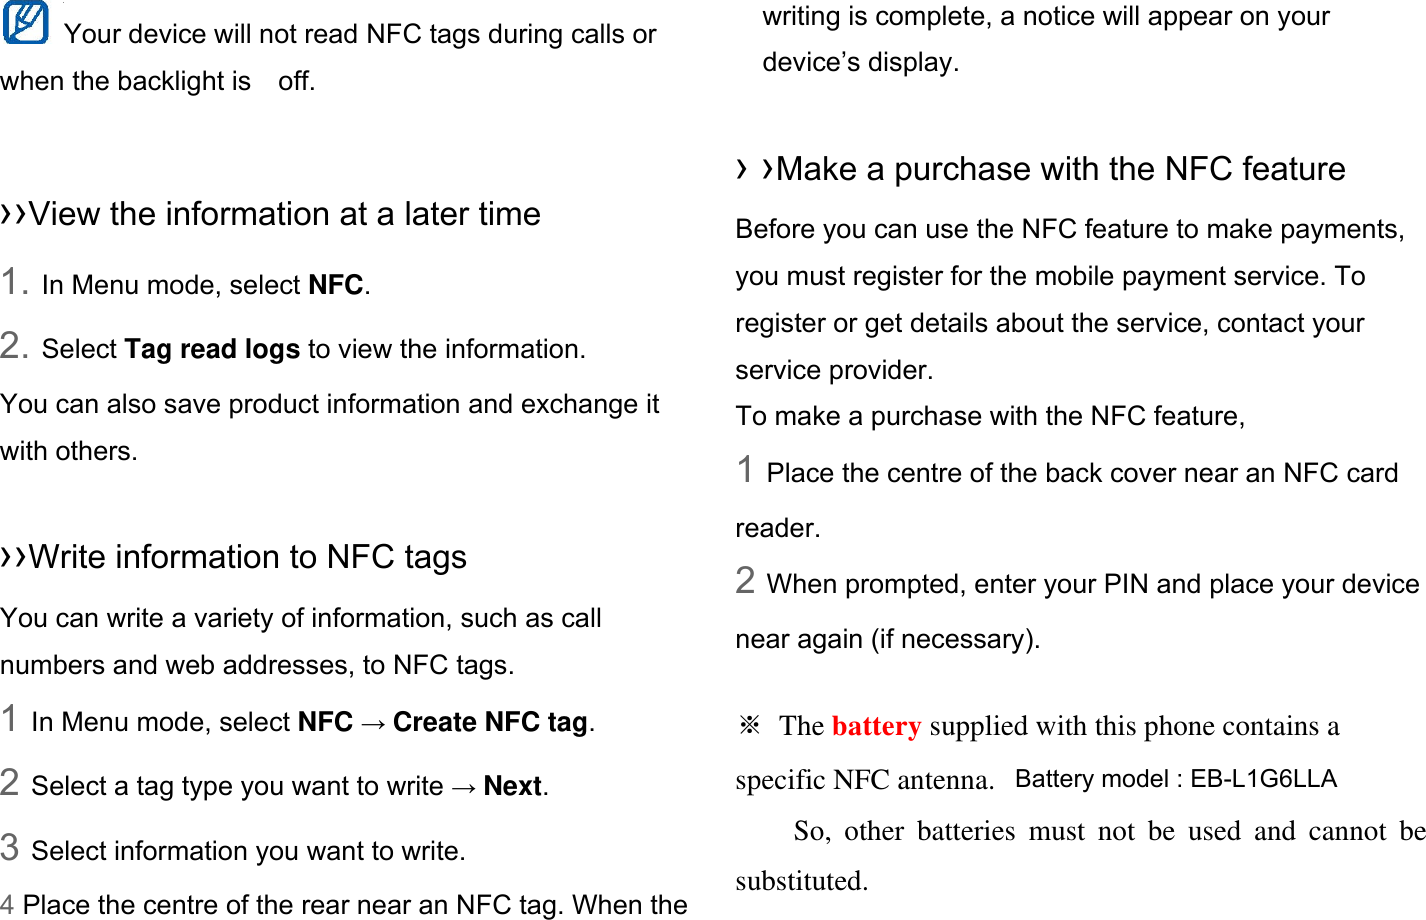 Your device will not read NFC tags during calls or when the backlight is    off.  ››View the information at a later time 1. In Menu mode, select NFC. 2. Select Tag read logs to view the information. You can also save product information and exchange it with others.  ››Write information to NFC tags   You can write a variety of information, such as call numbers and web addresses, to NFC tags. 1 In Menu mode, select NFC → Create NFC tag. 2 Select a tag type you want to write → Next. 3 Select information you want to write. 4 Place the centre of the rear near an NFC tag. When the writing is complete, a notice will appear on your device’s display.  › ›Make a purchase with the NFC feature   Before you can use the NFC feature to make payments, you must register for the mobile payment service. To register or get details about the service, contact your service provider. To make a purchase with the NFC feature, 1 Place the centre of the back cover near an NFC card reader. 2 When prompted, enter your PIN and place your device near again (if necessary).  ※ The battery supplied with this phone contains a specific NFC antenna.       So, other batteries must not be used and cannot be substituted. Battery model : EB-L1G6LLA